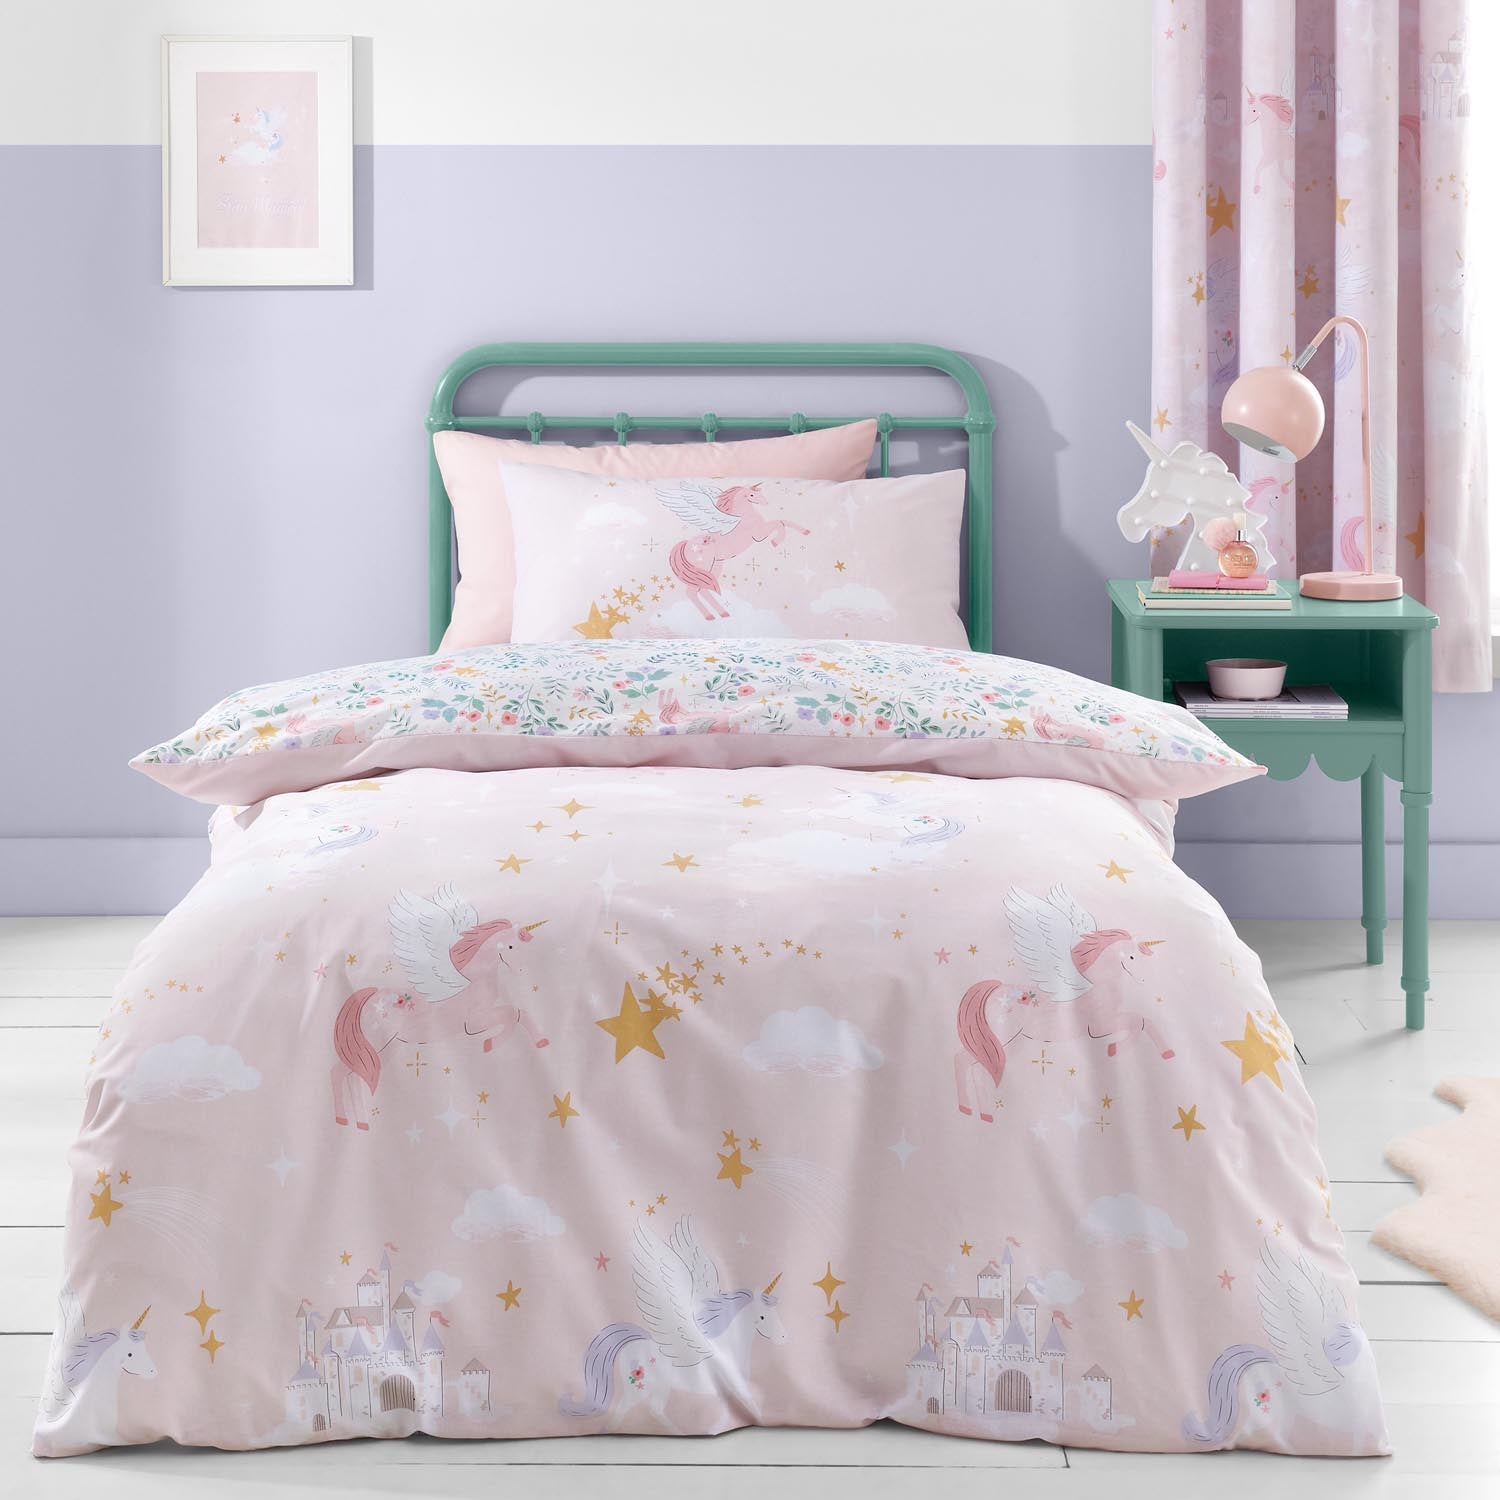 The Home Luxury Collection Magical Unicorn Duvet Cover Set 2 Shaws Department Stores